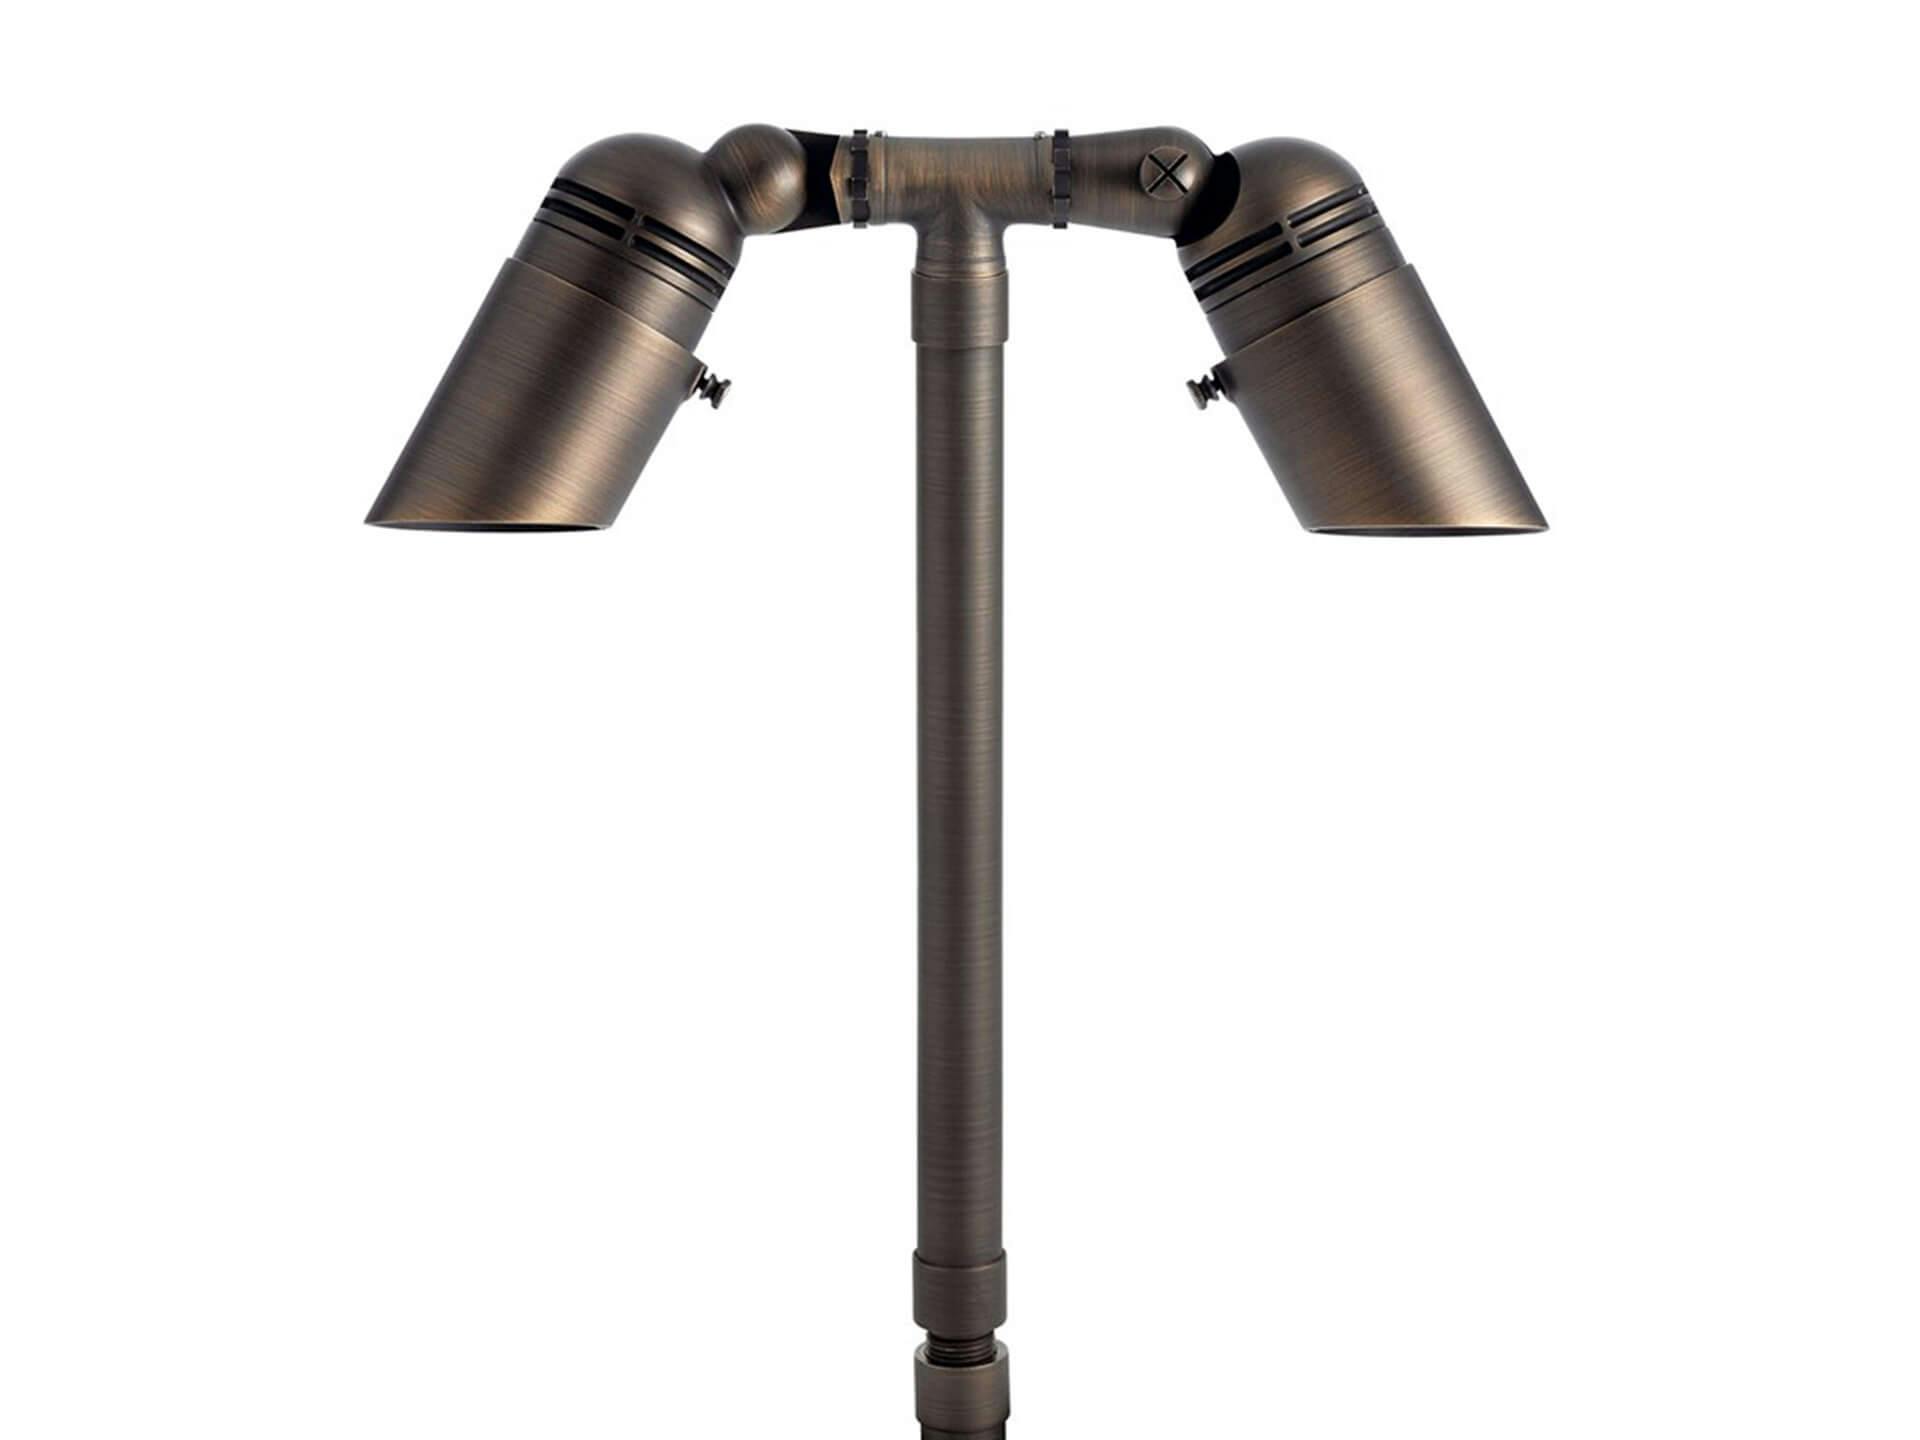 A two fixture mount with LED lights on each side, all in centennial brass